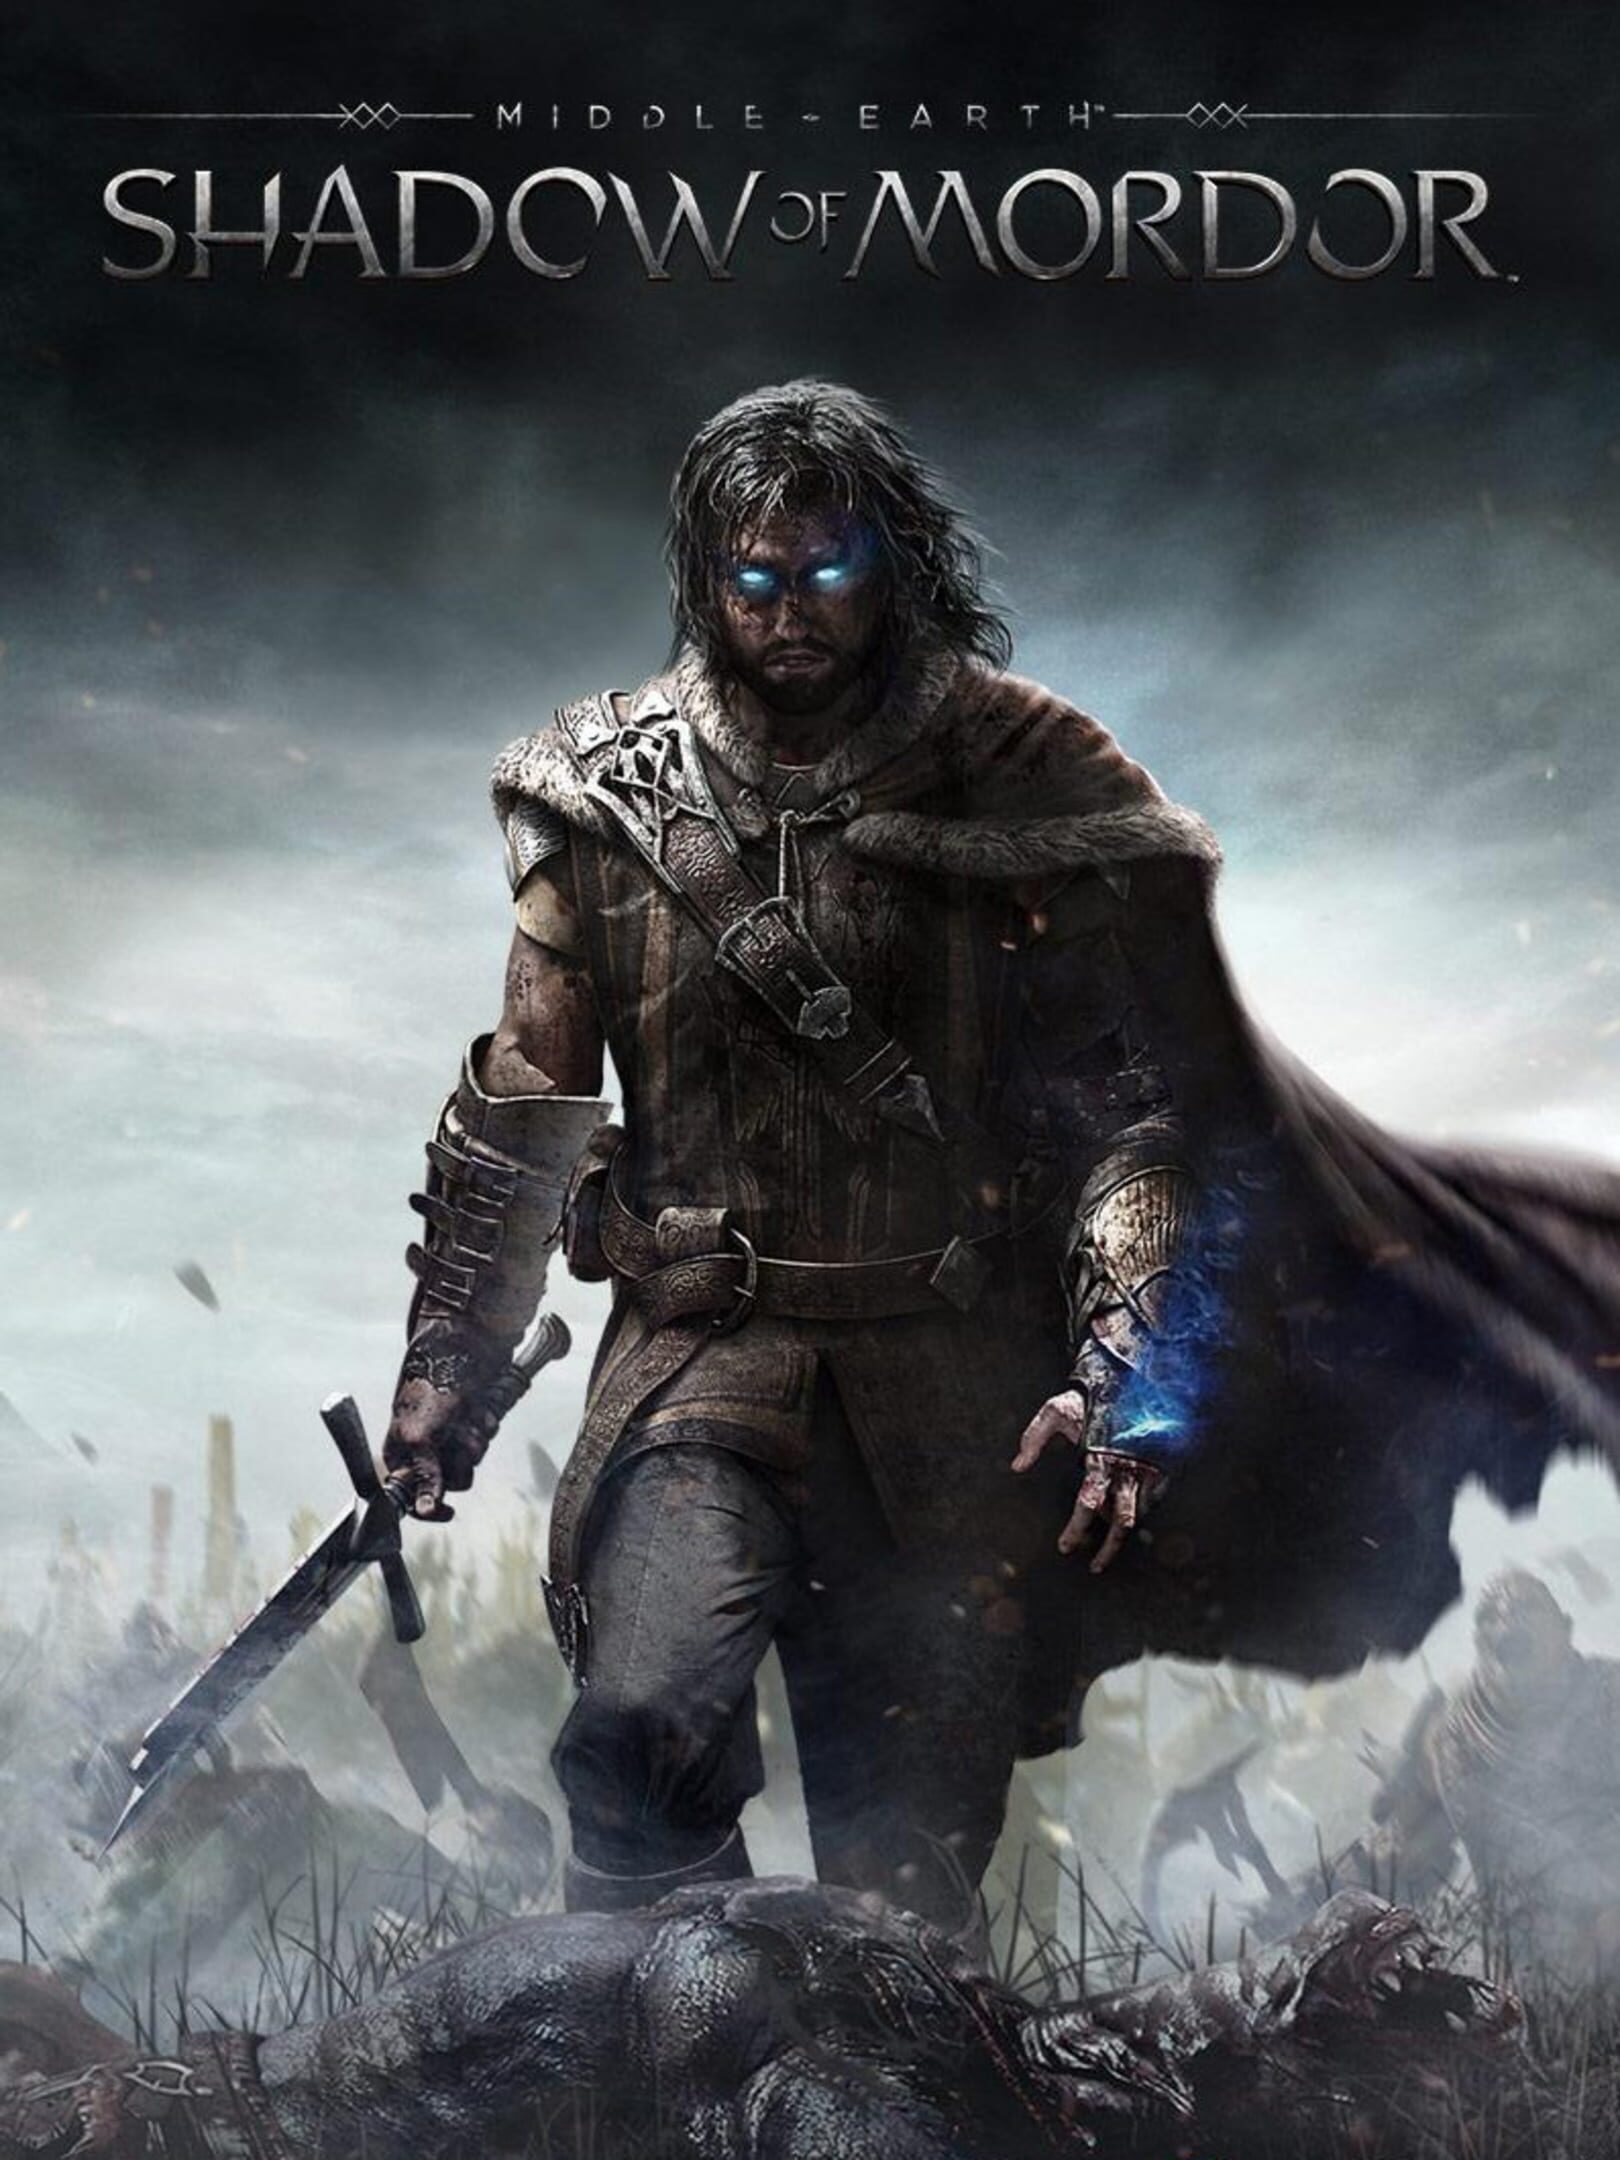 Shadow of mordor game. Средиземье: тени Мордора. Middle-Earth™: Shadow of Mordor™ обложка. Тени Мордора игра. Игра тени Мордора 2.